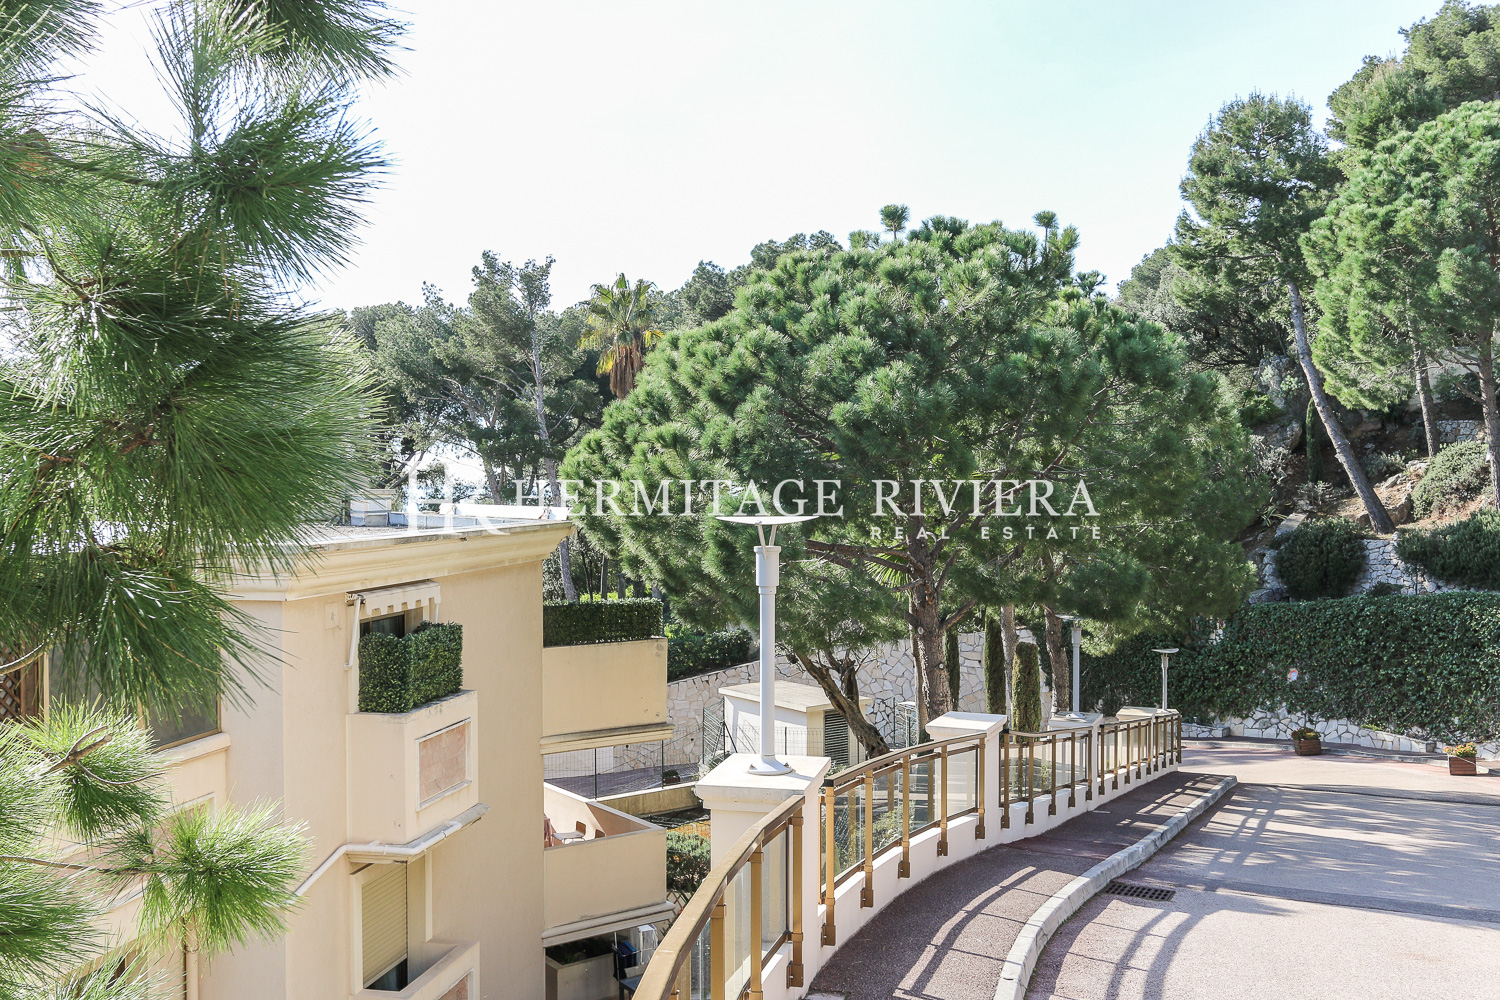 Apartment to renovate with views over Monaco (image 10)